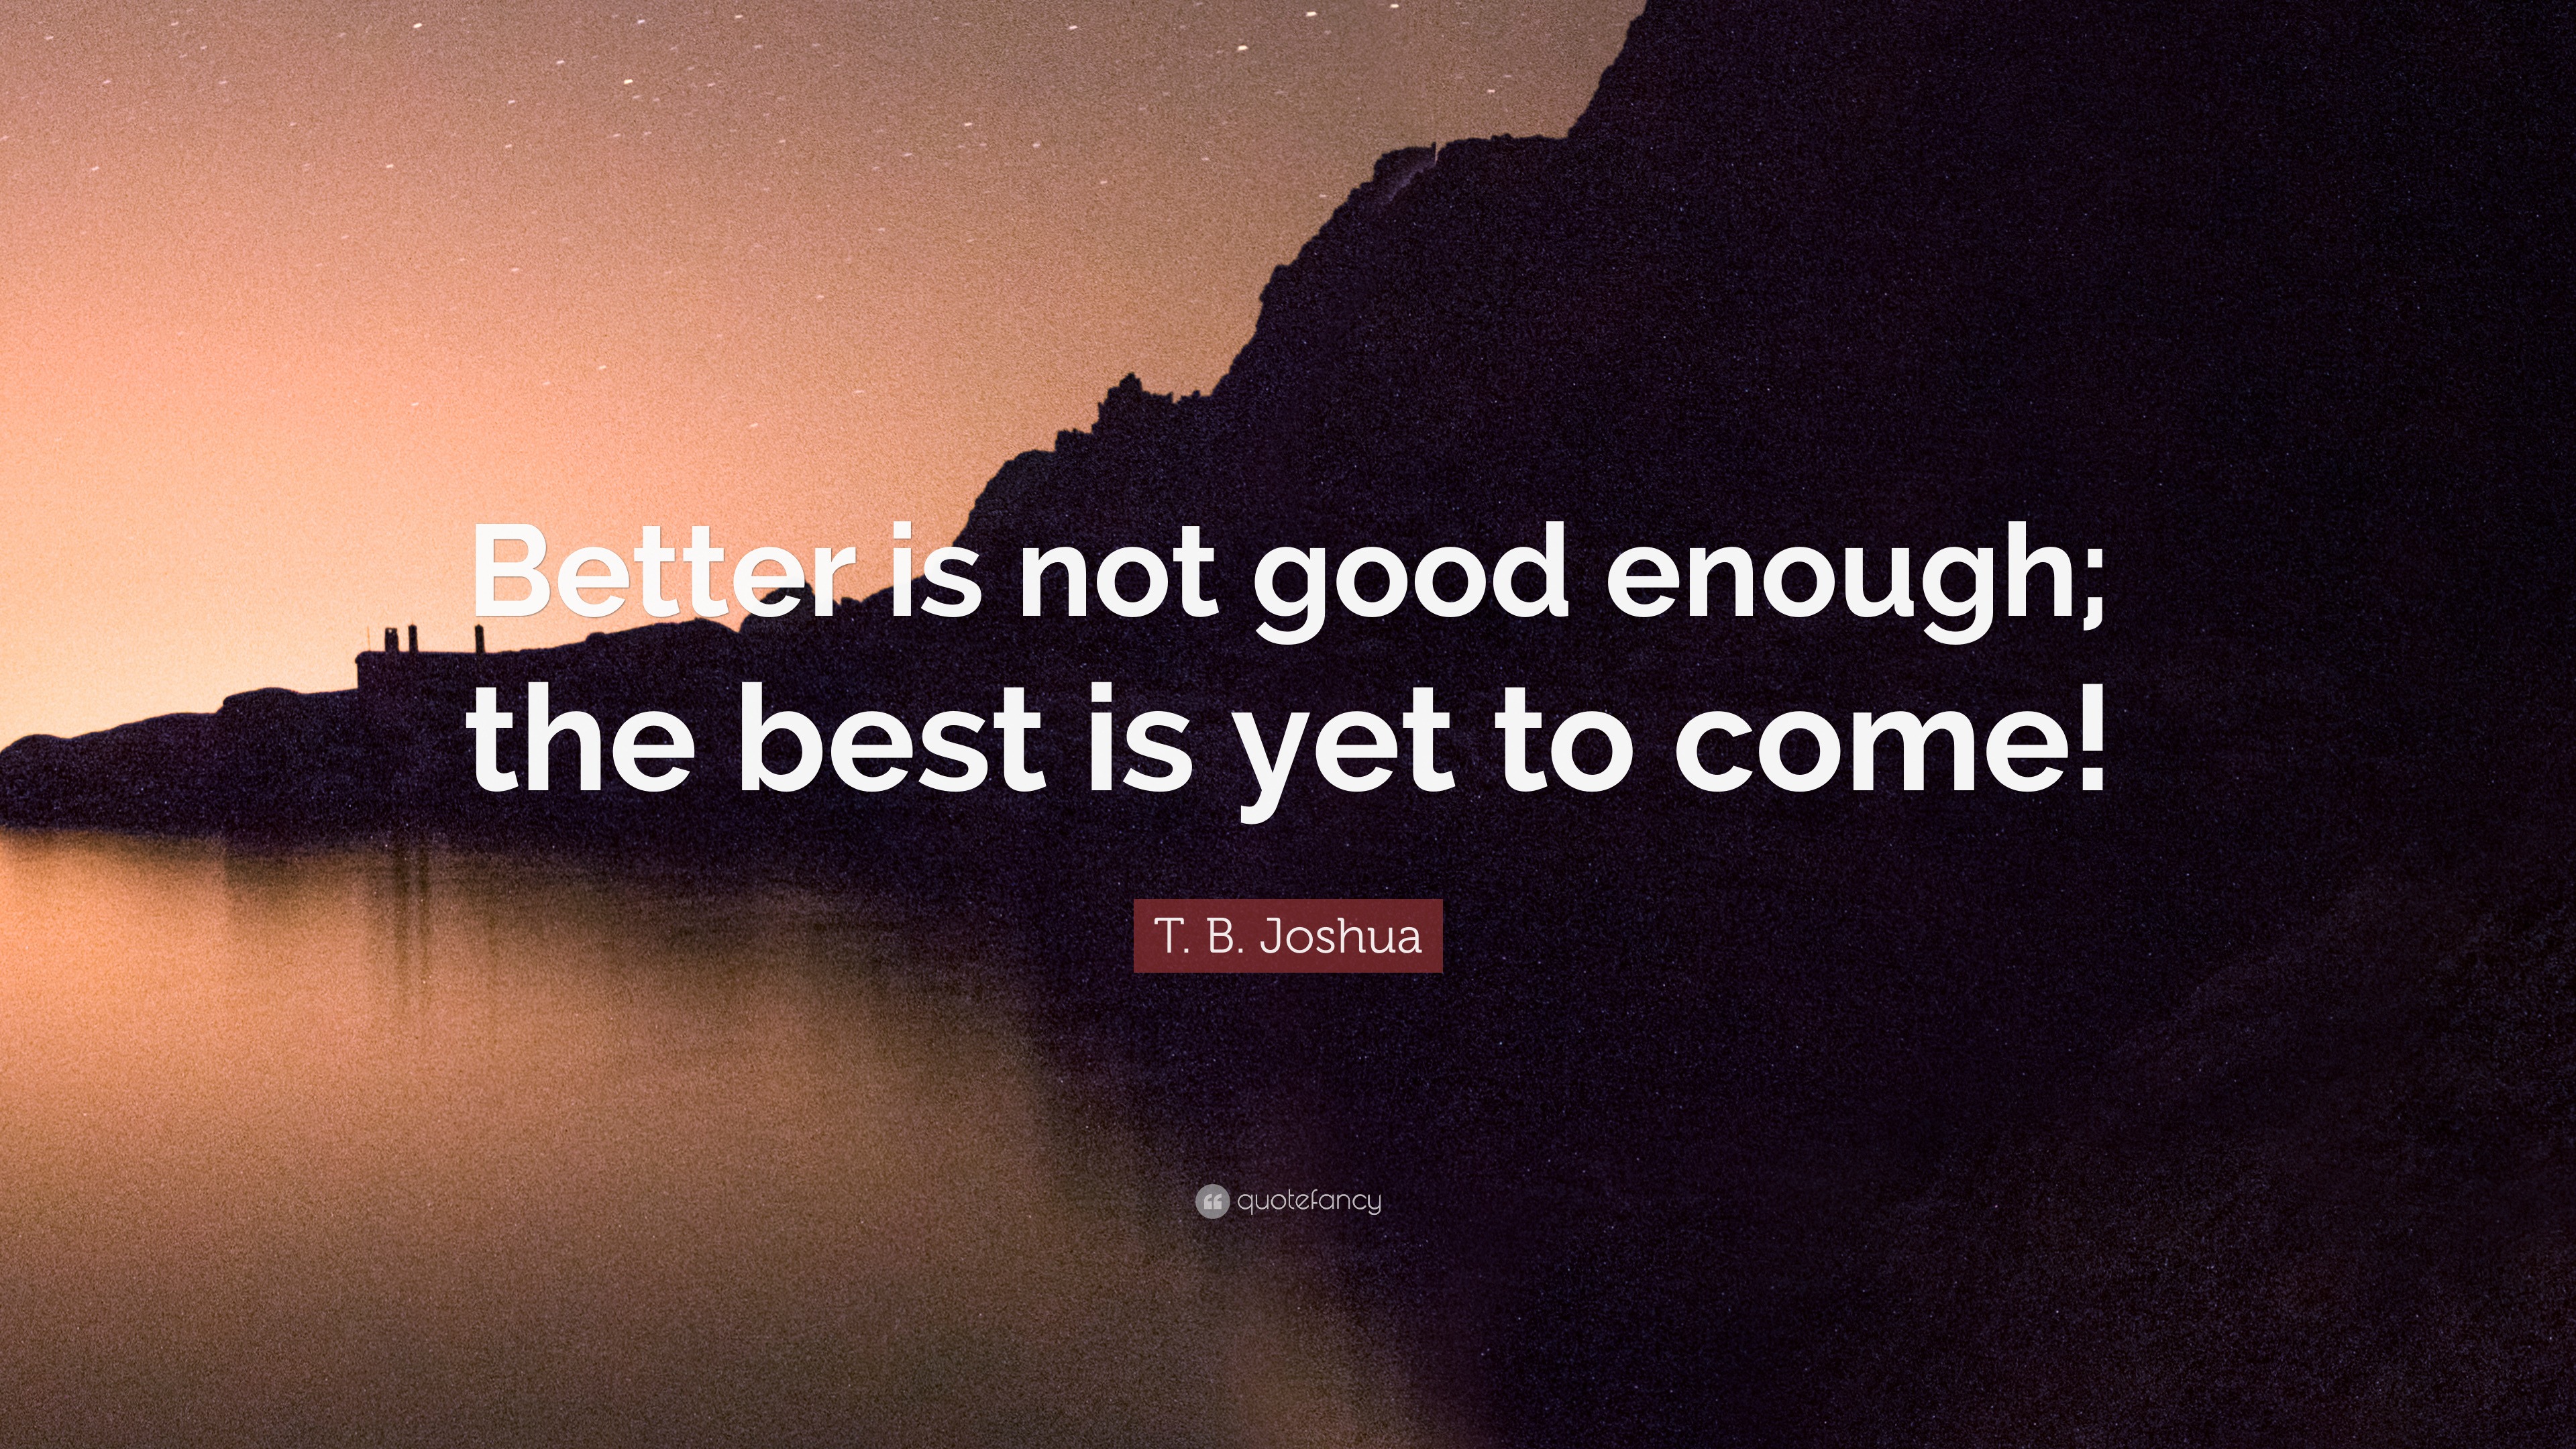 T. B. Joshua Quote “Better is not good enough; the best is yet to come!”